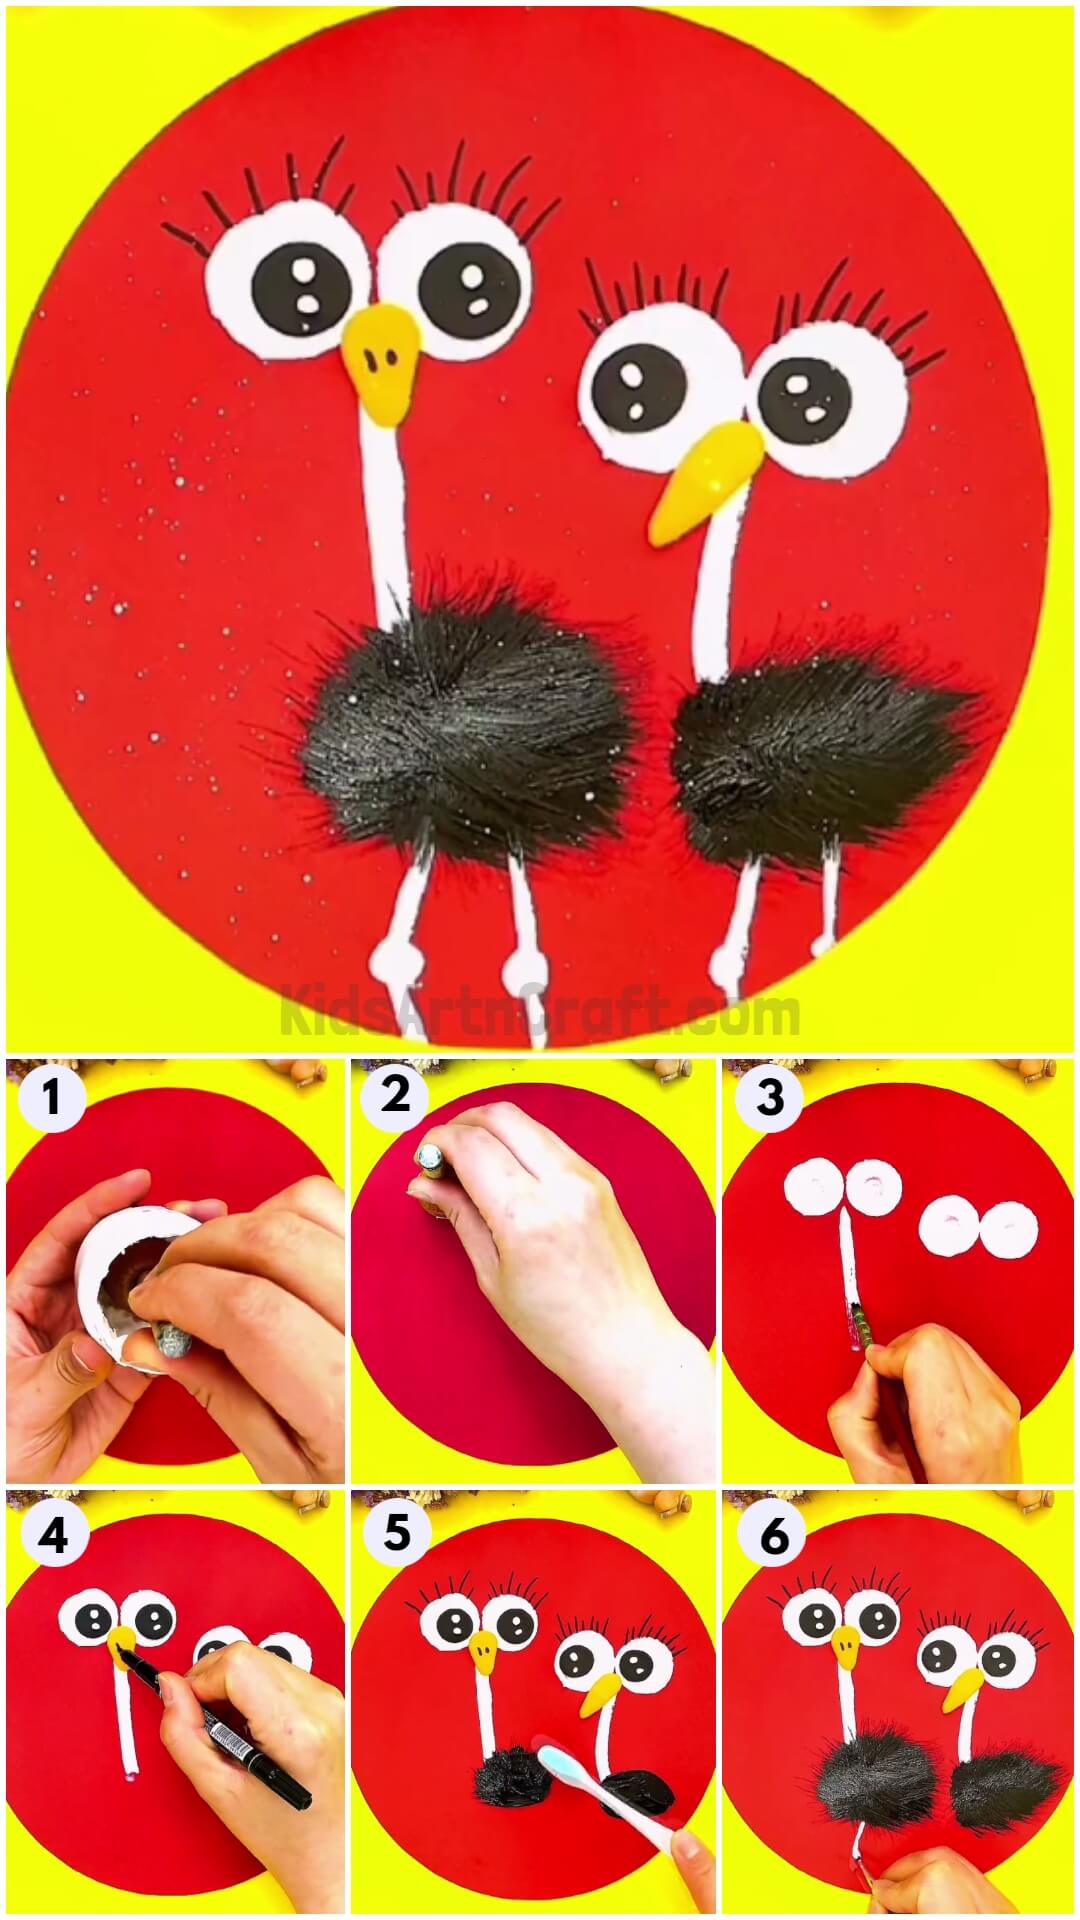 Cute Ostrich Unique Crafts Step-by-step Instructions